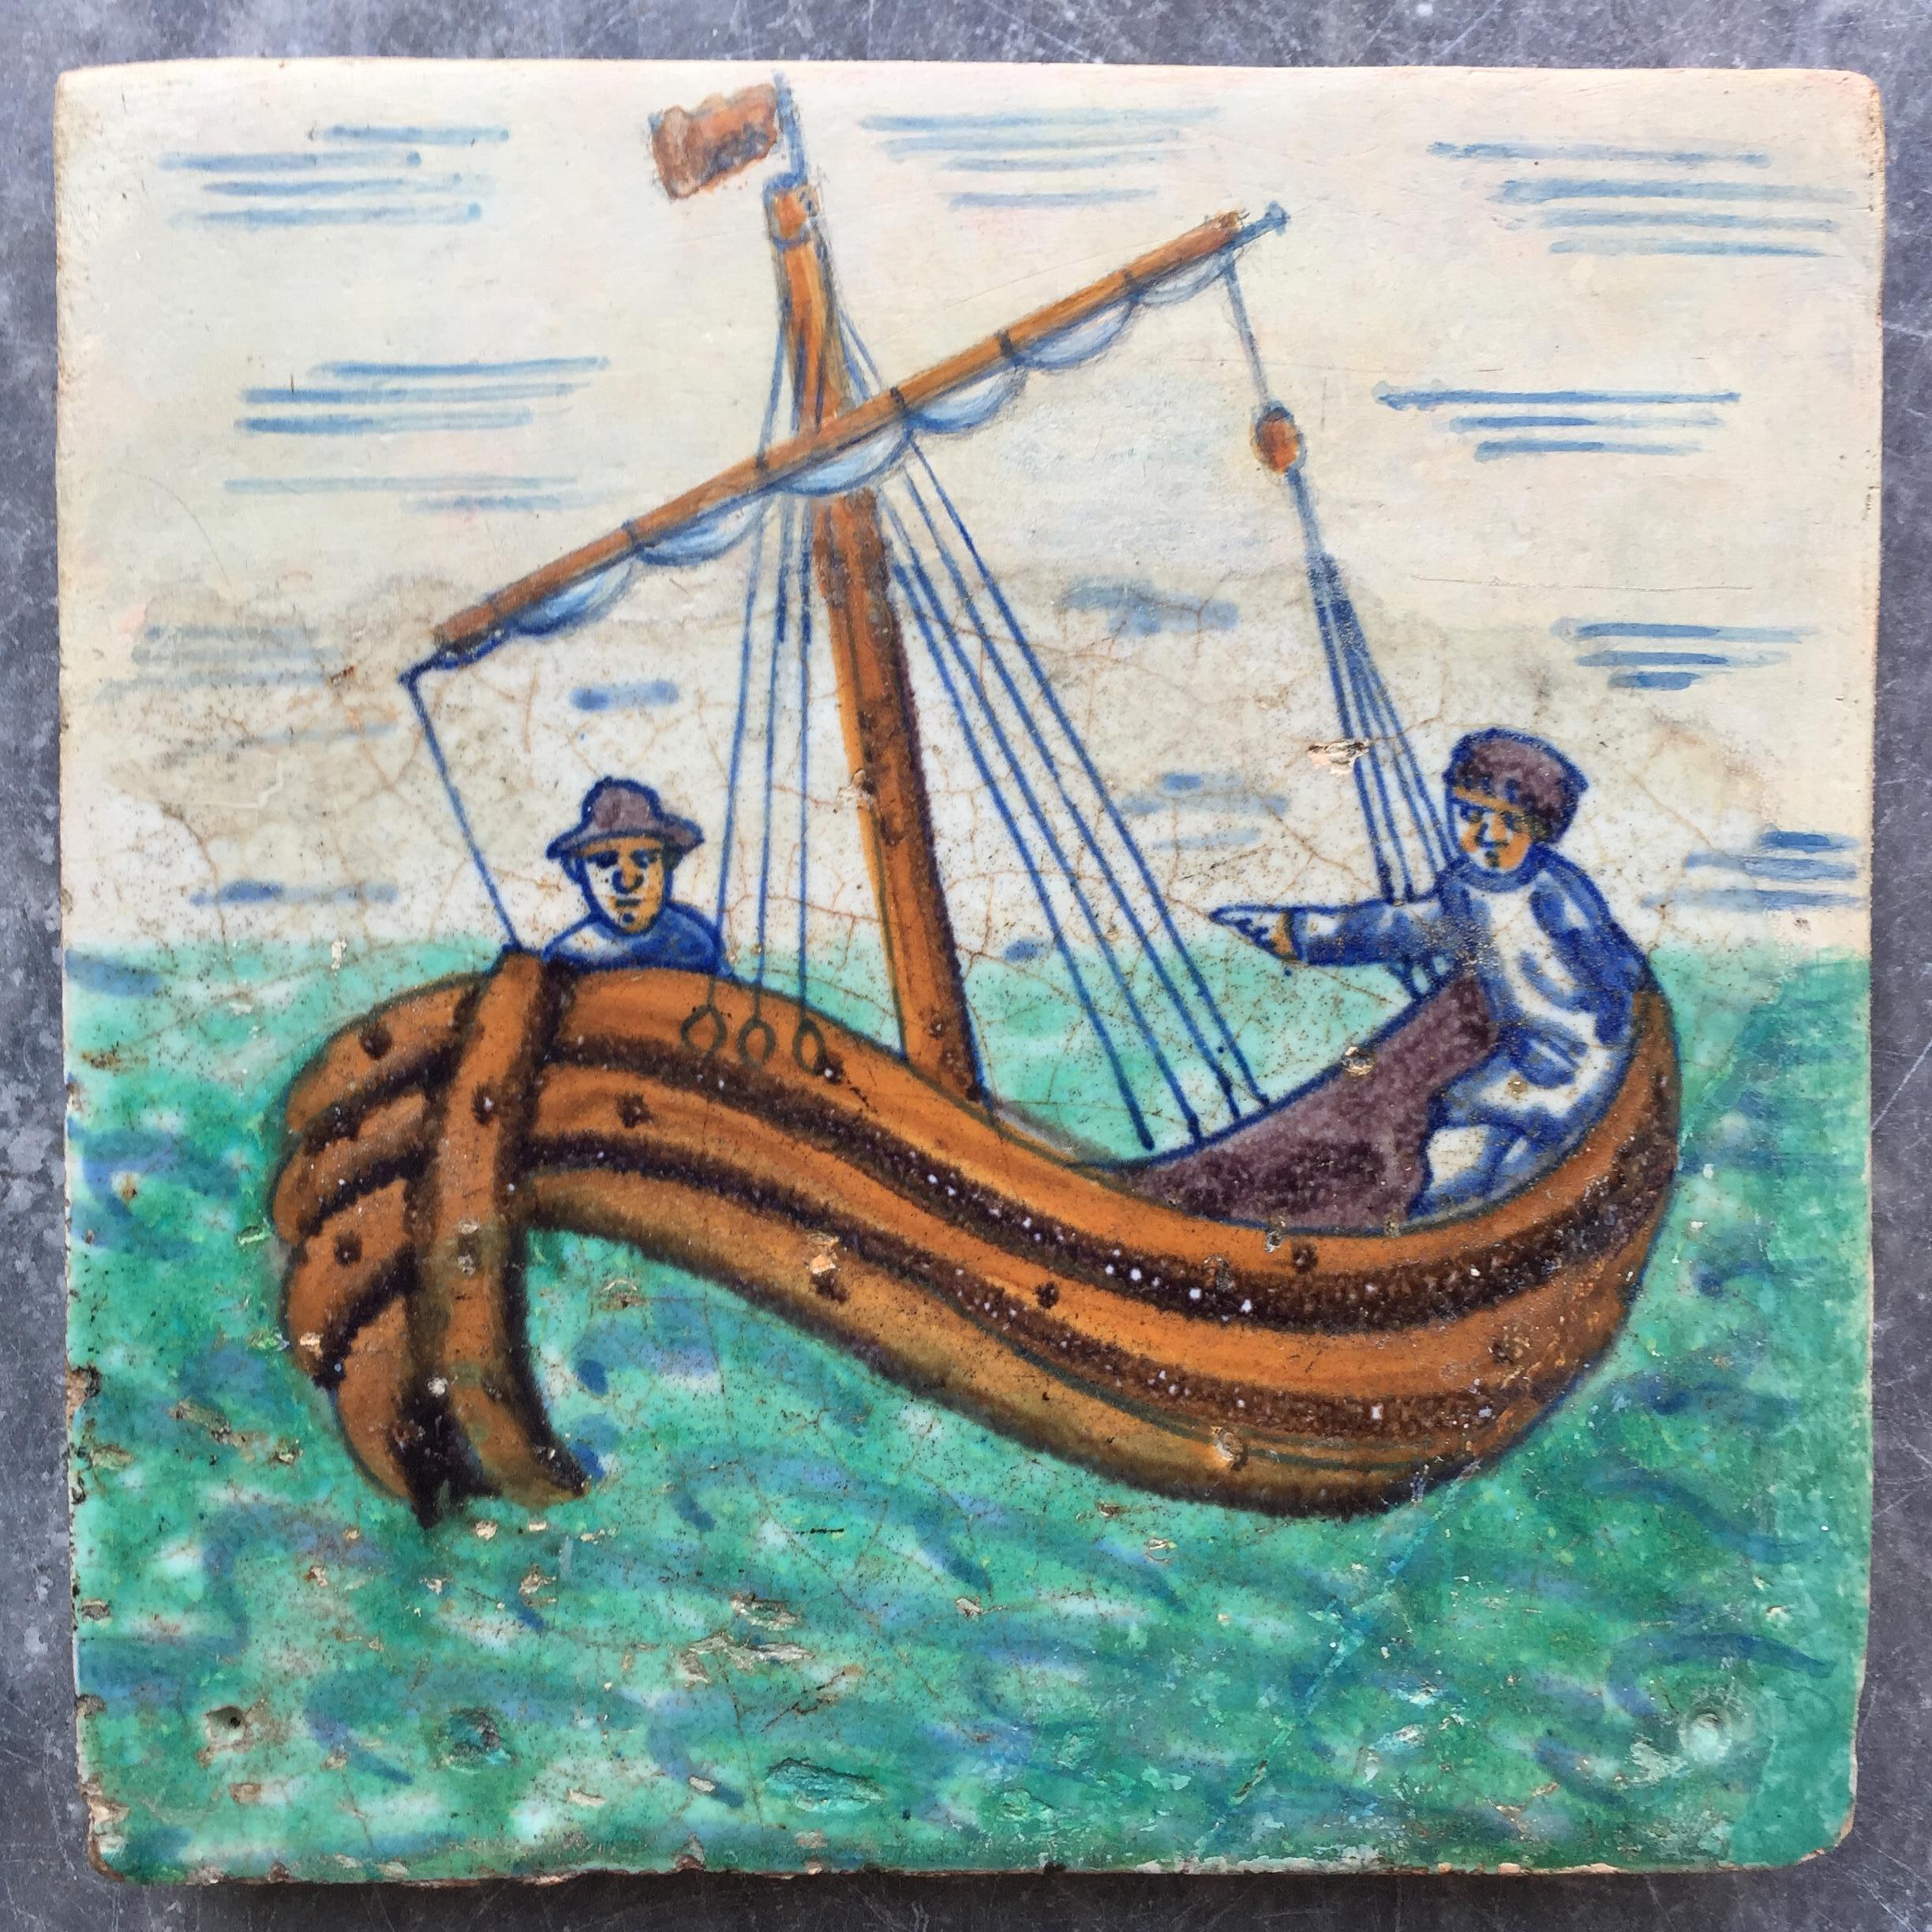 An extremely rare, so-called, Rotterdammer tile, with the decoration of a sailboat.

Country: The Netherlands
Place: Rotterdam
Date: circa 1615 - 1620
Workshop: Claes Wijtmans

This tile comes from one of the most rare and sought after tile